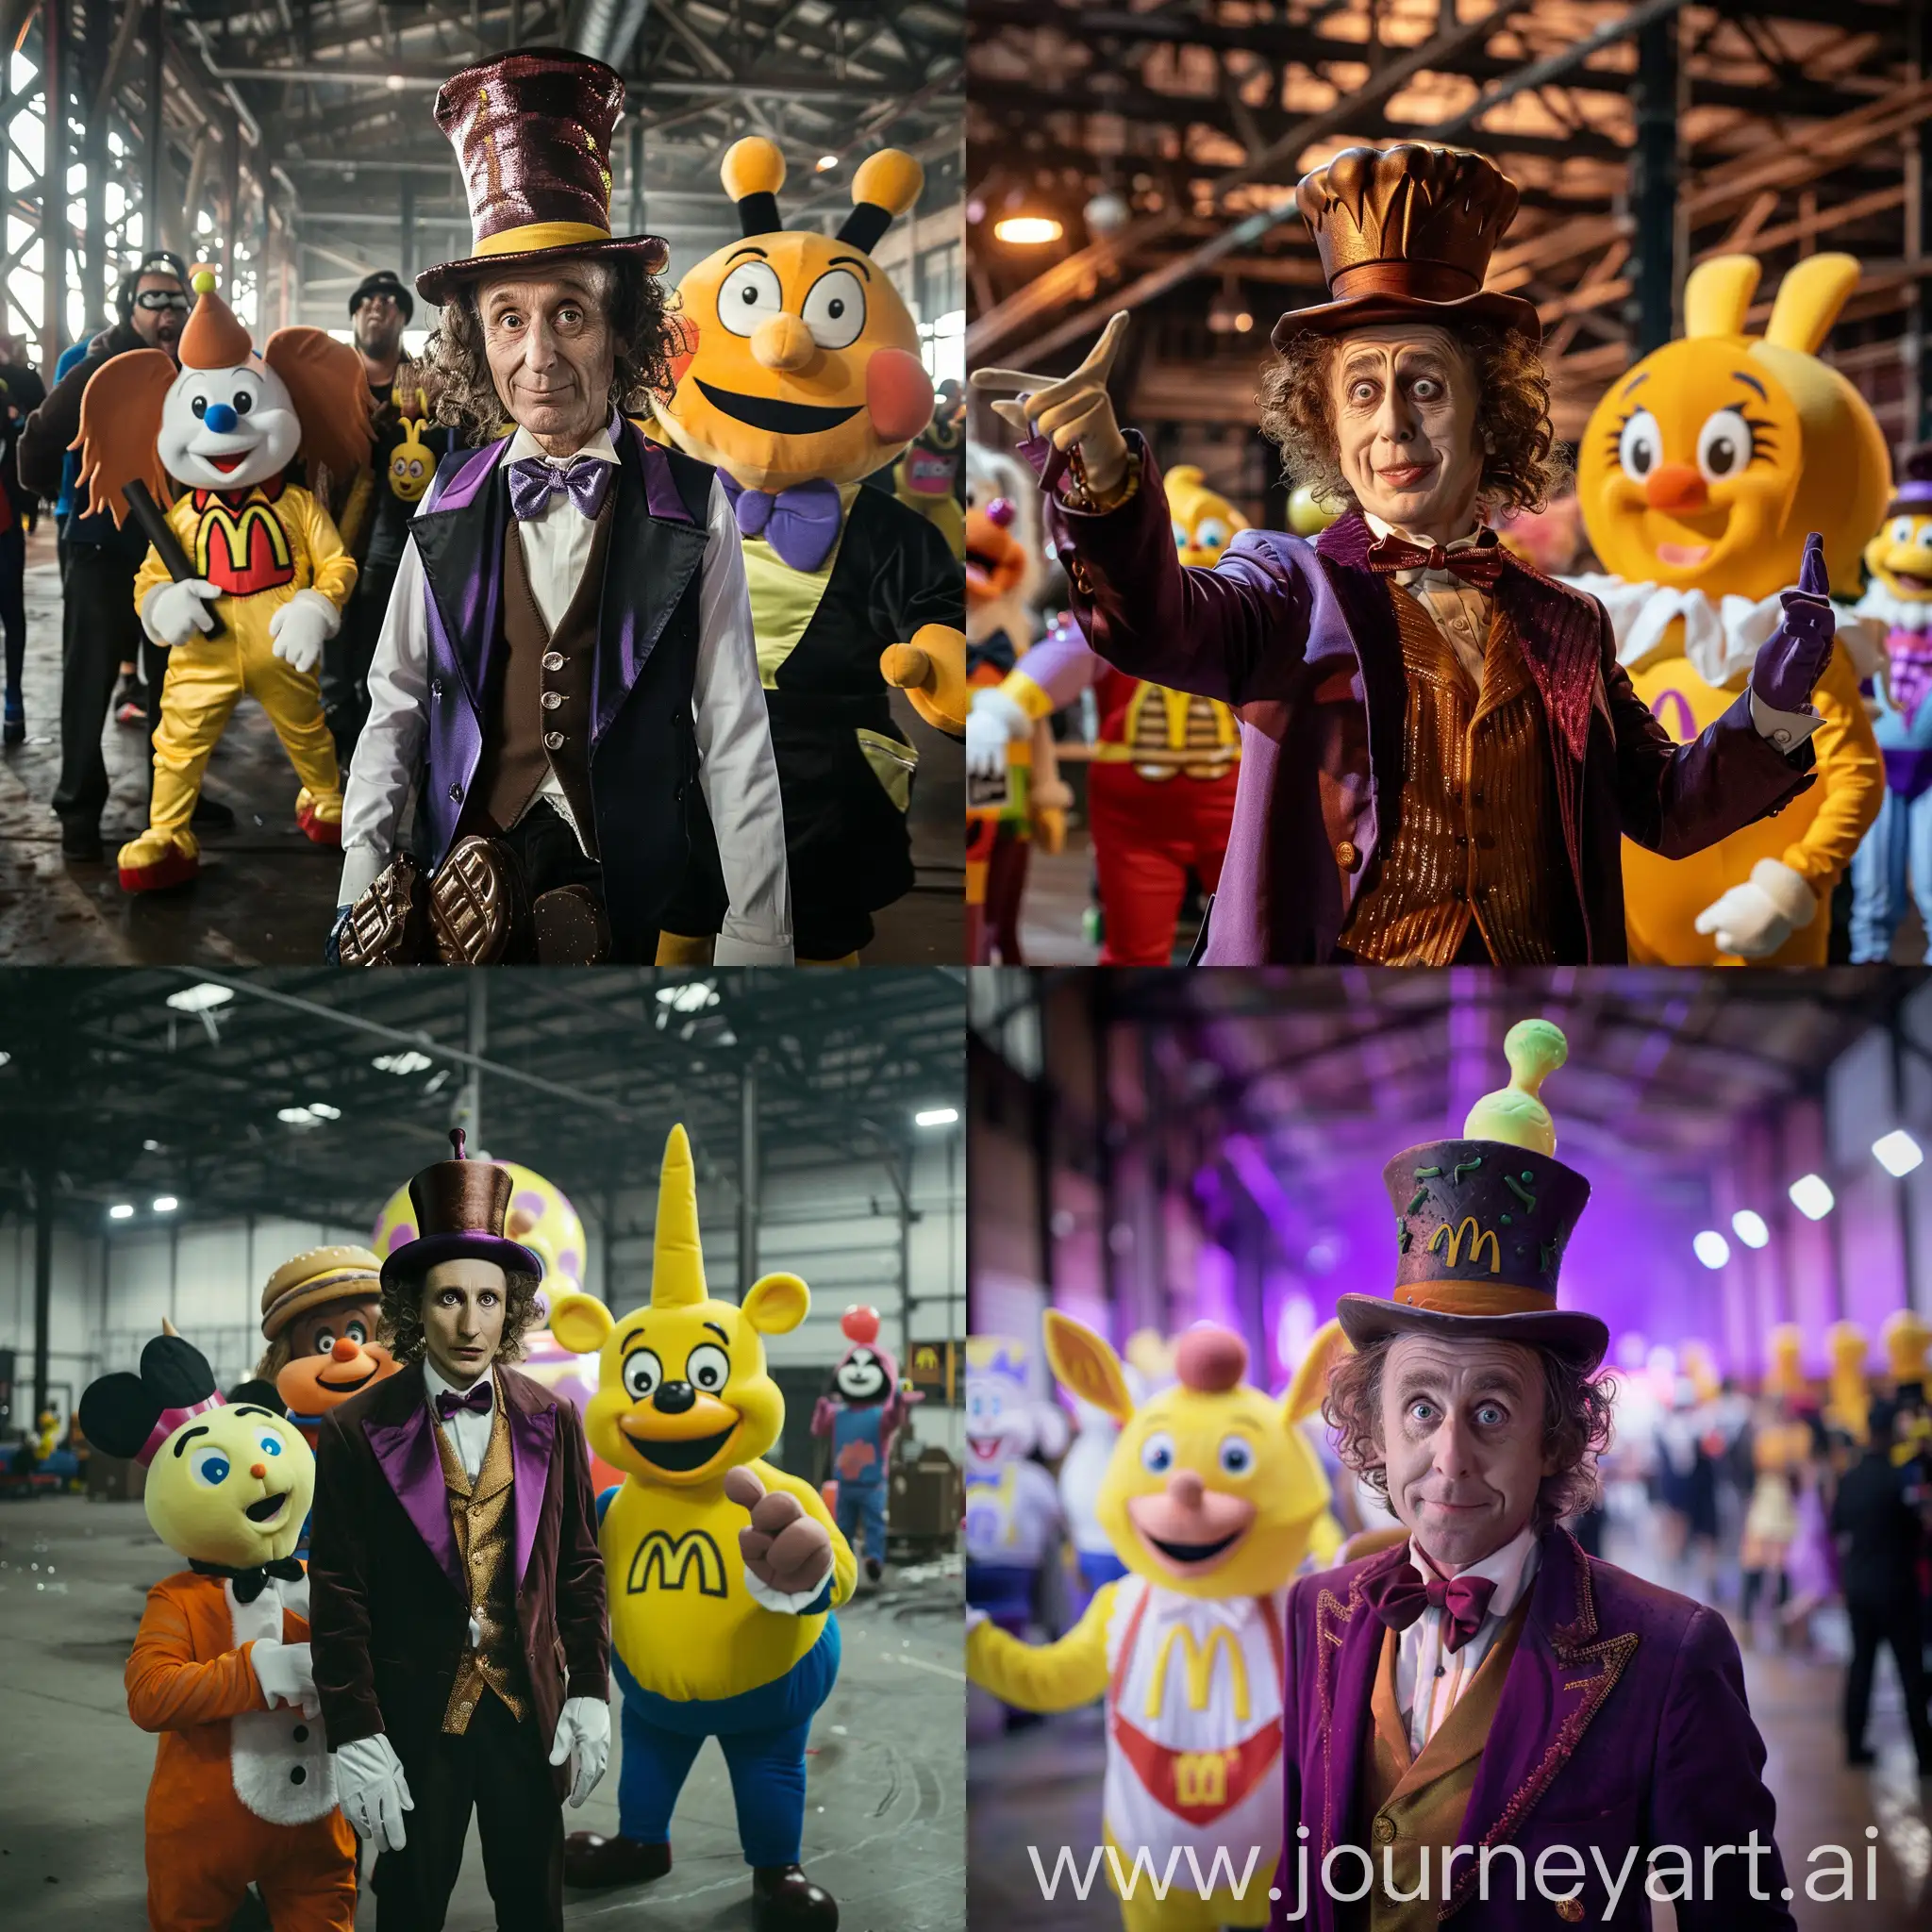 Willy Wonka at Chocolate Factory in a Chaotic Warehouse Rave McDonalds Mascots and Nickelodeon Cartoon characters attending